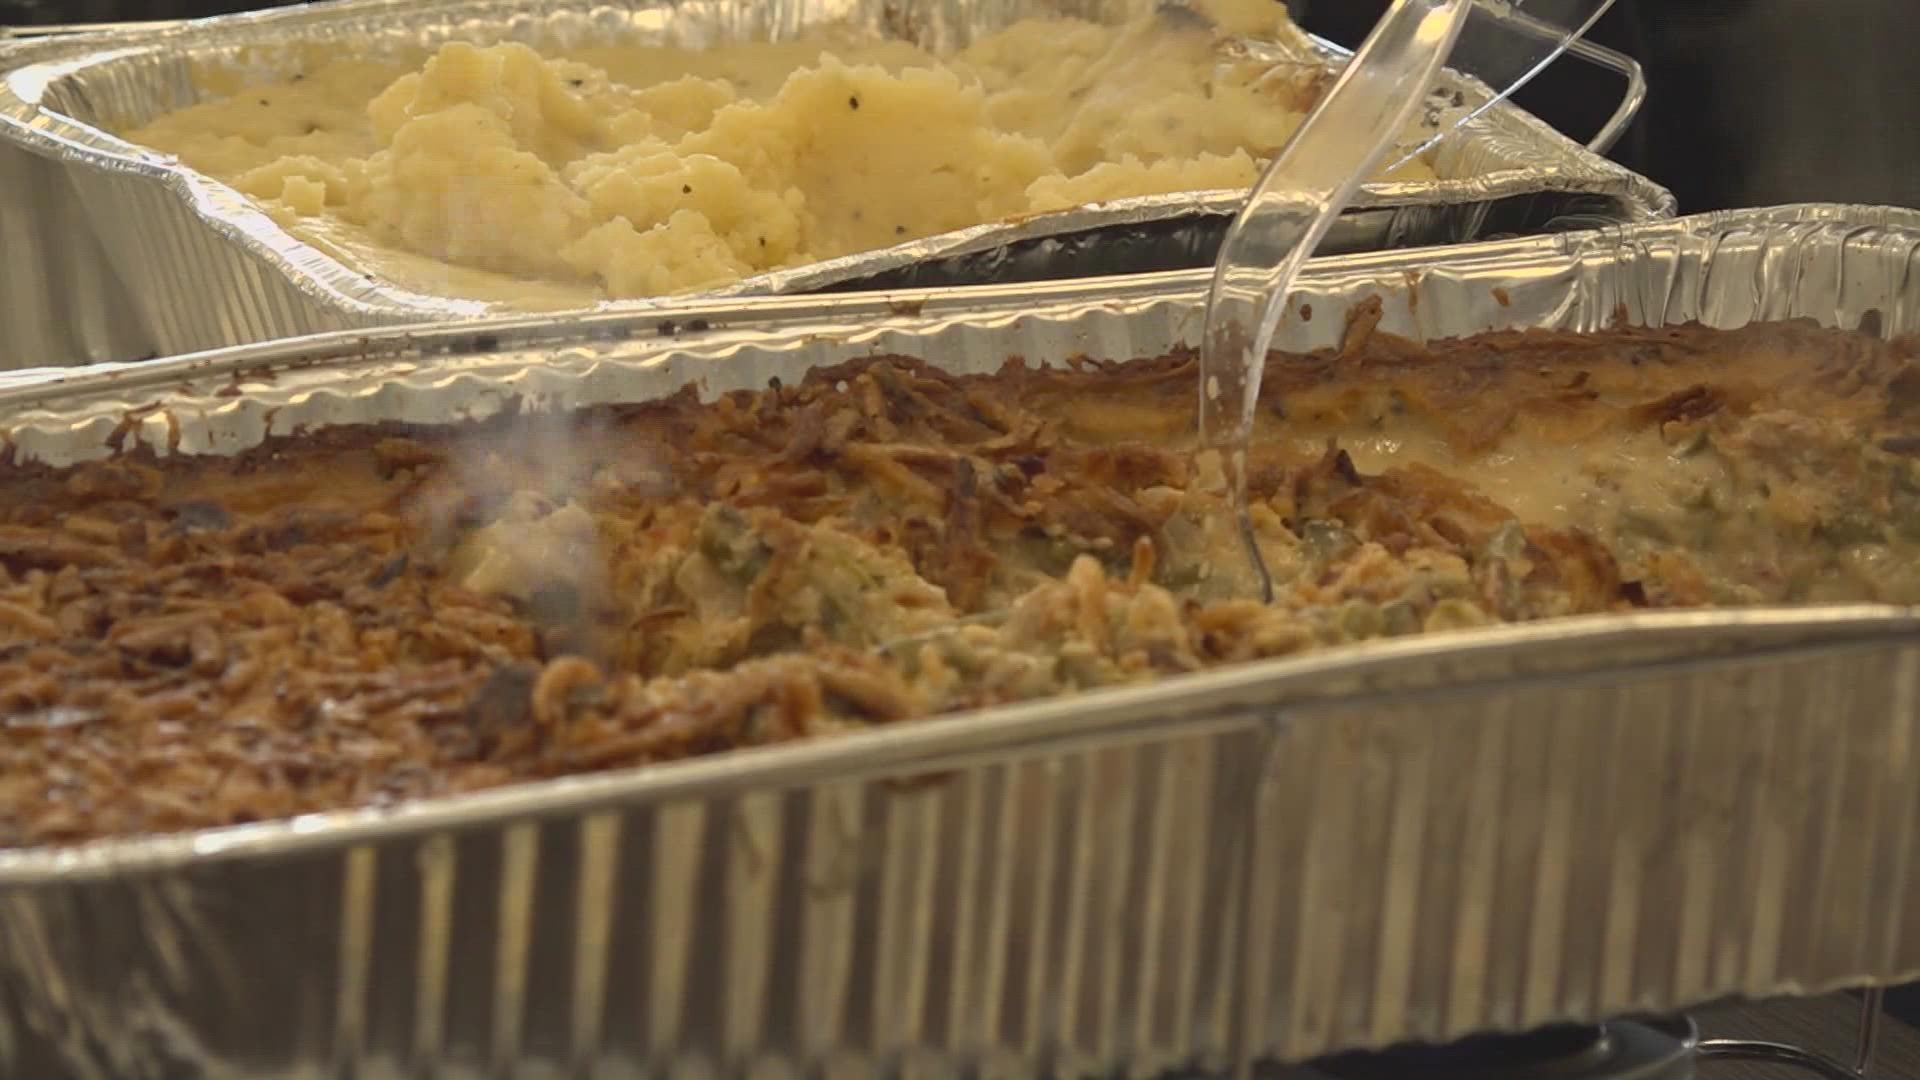 The nonprofit organization held a Thanksgiving feast for its incoming residents and staff members.